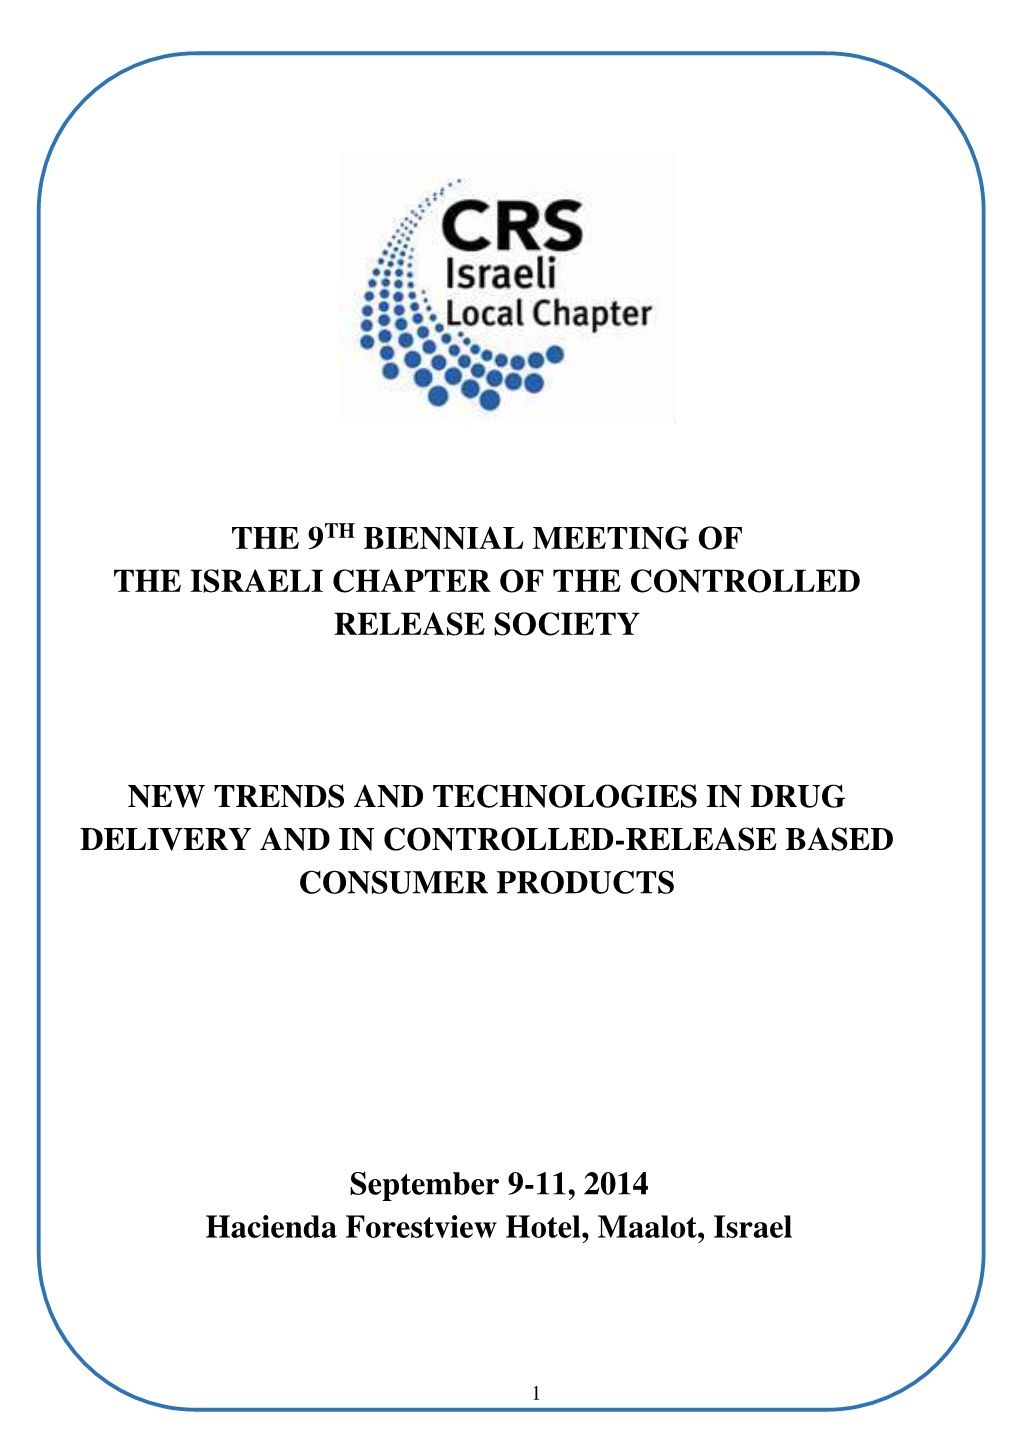 The 9Th Biennial Meeting of the Israeli Chapter of the Controlled Release Society New Trends and Technologies in Drug Delivery